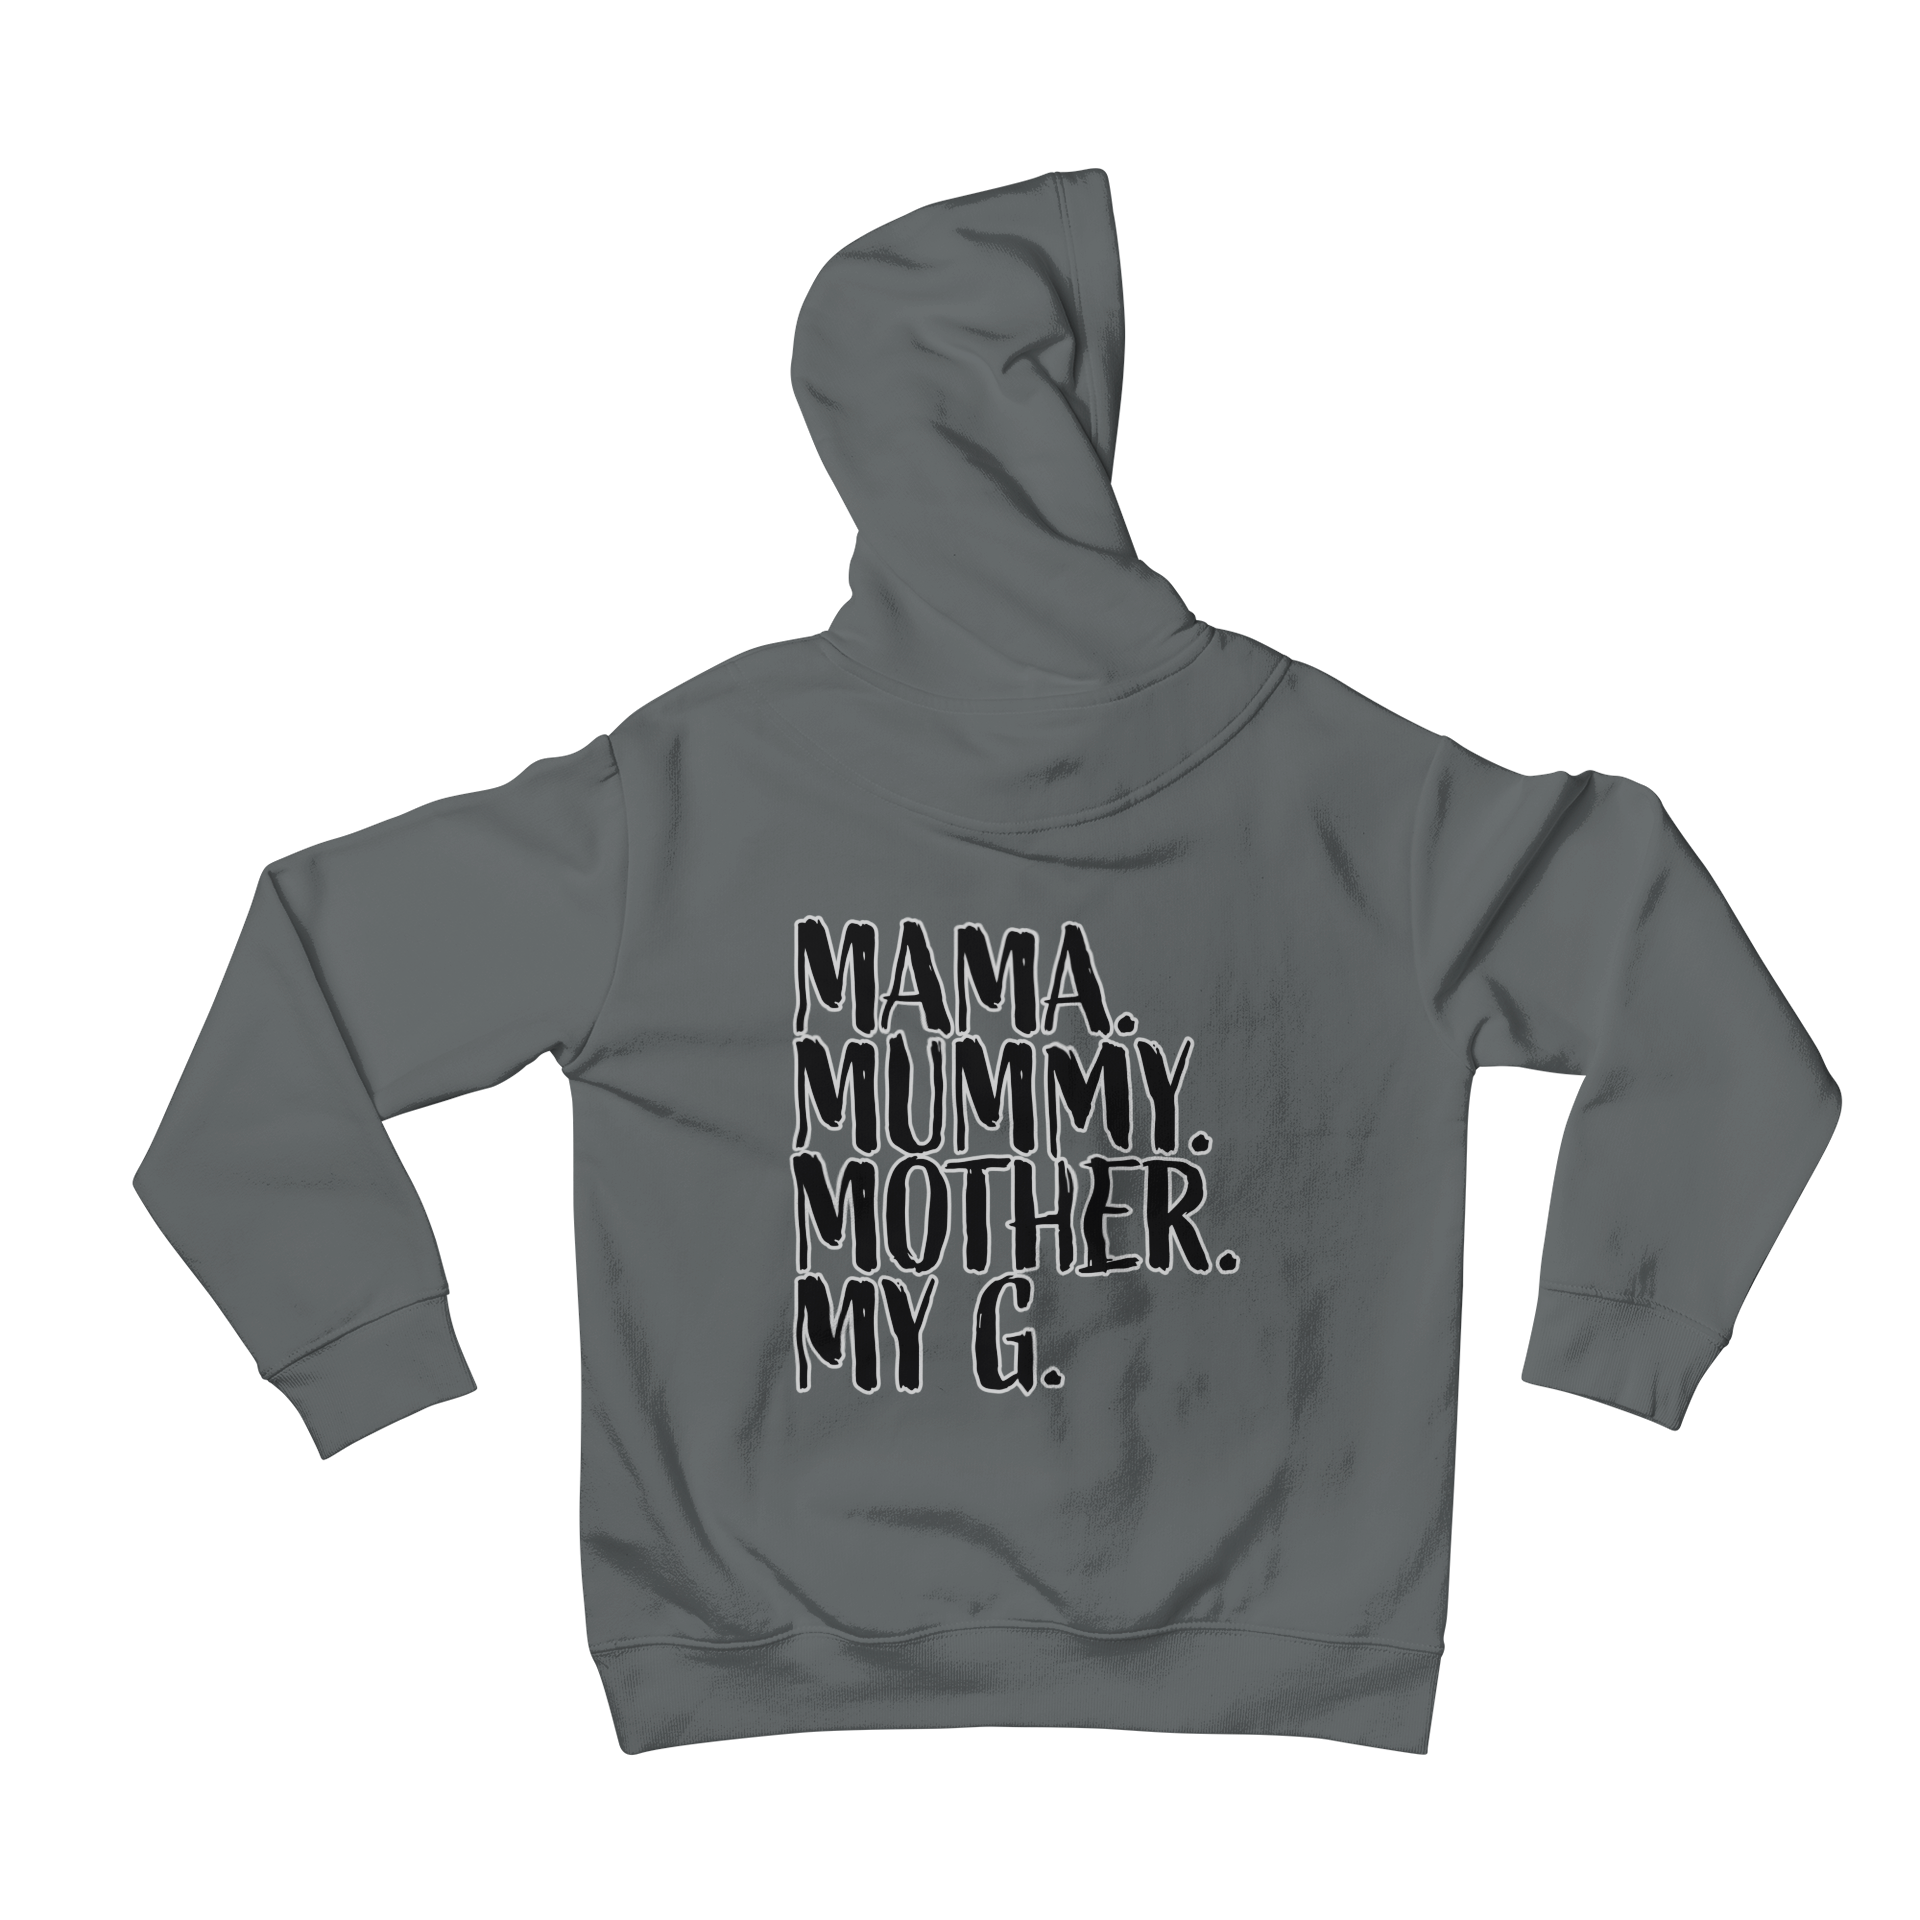 Looking for a stylish hoodie with a unique saying? Check out Teevolution's back print hoodie featuring the trendy saying "Mama Mummy Mother My G". Stay cozy and make a fashion statement all at once with this cool hoodie.